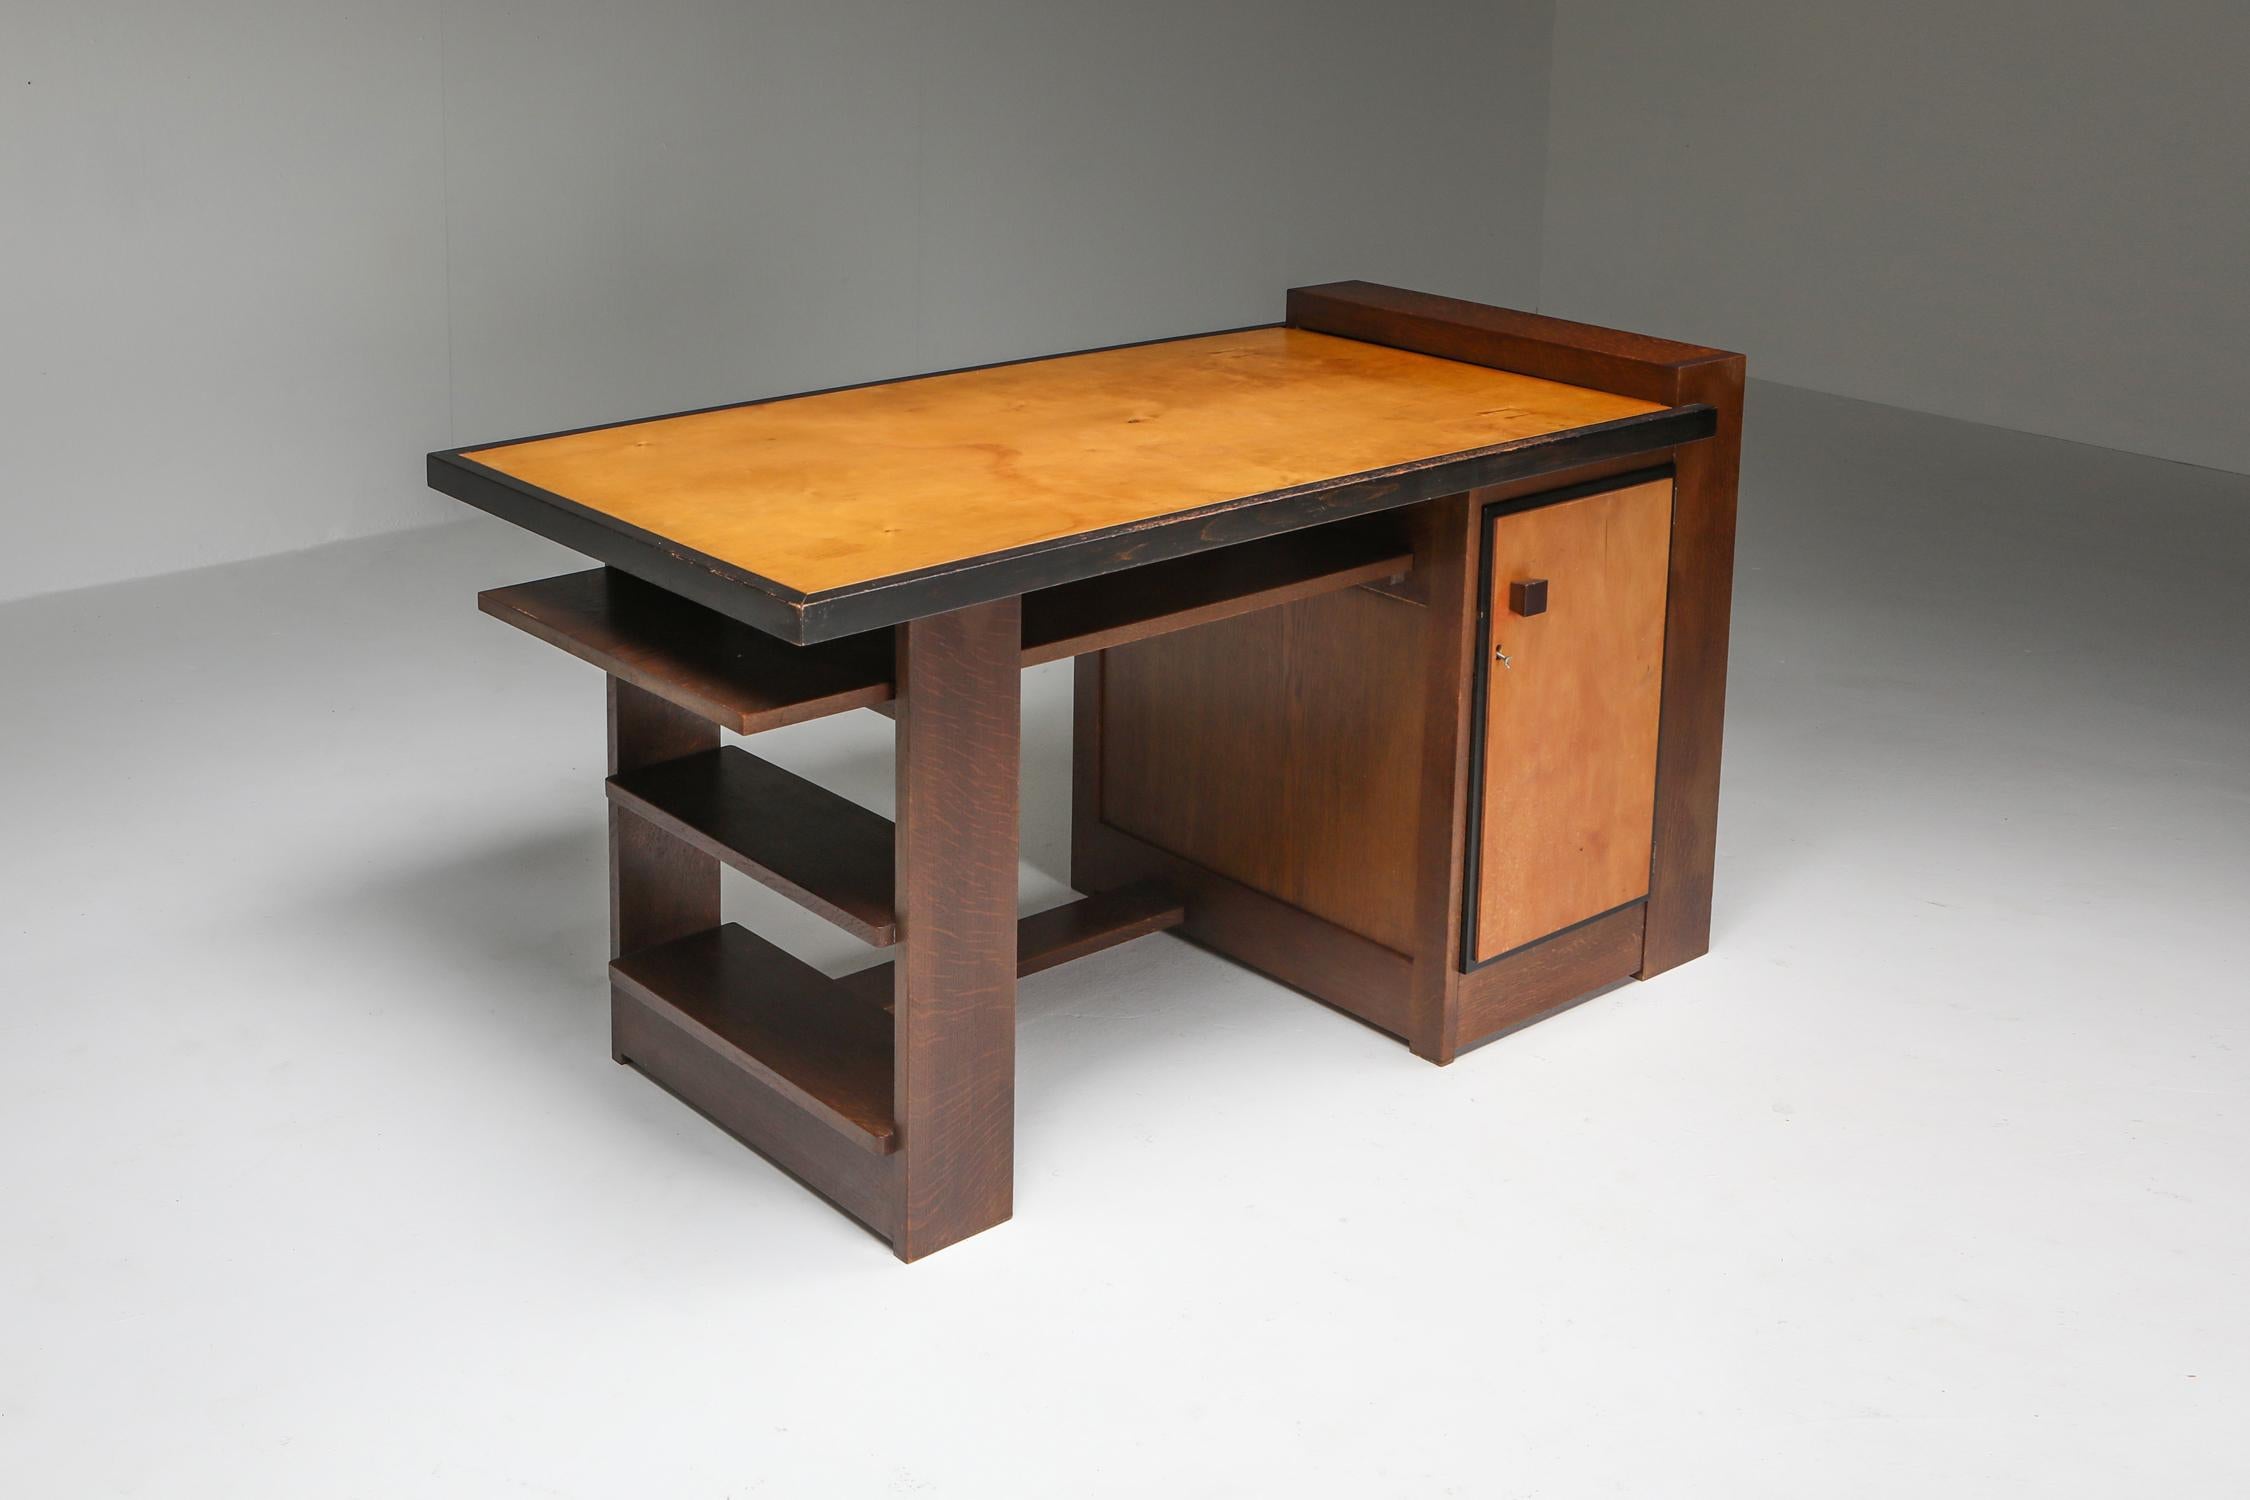 Modernist Desk by Frits Spanjaard, Wouda Inspired, Netherlands, 1930s In Excellent Condition For Sale In Antwerp, BE